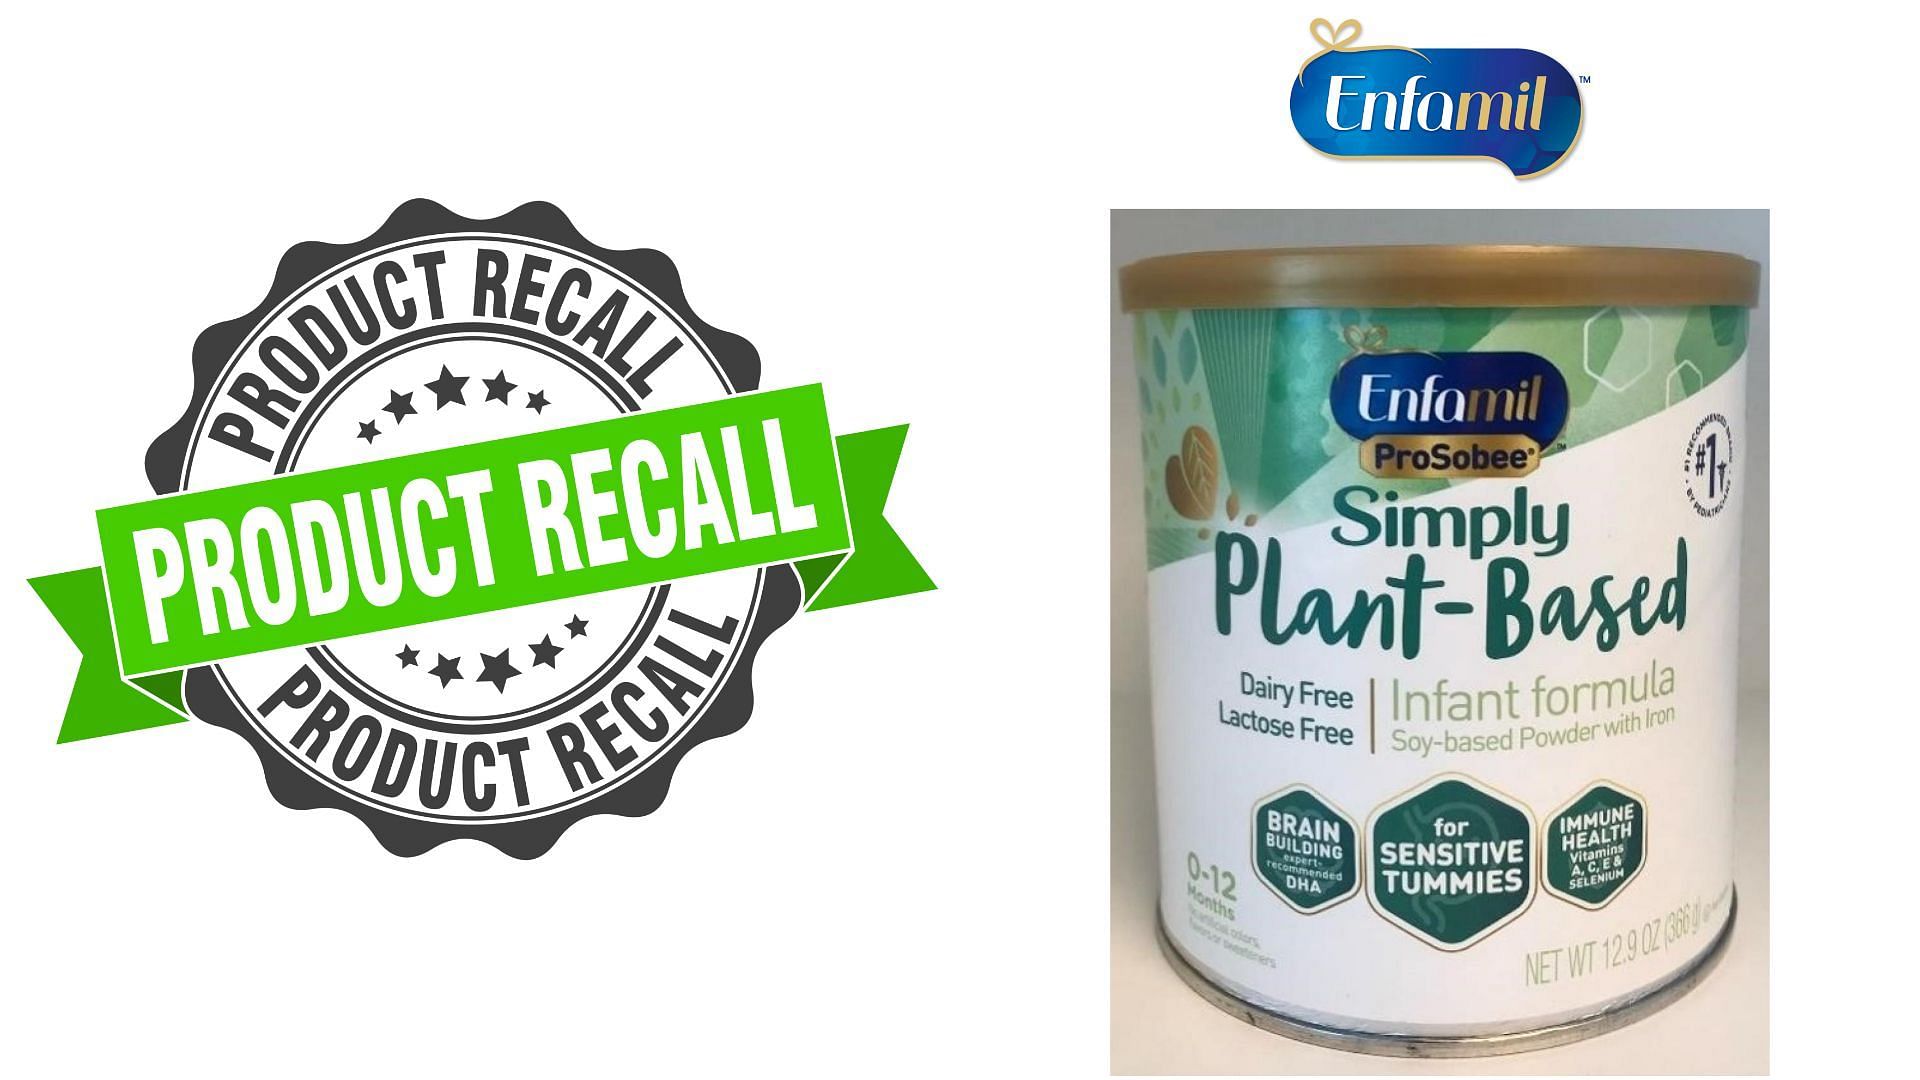 Reckitt issued a nationwide recall for two select batches of ProSobee 12.9 oz. Simply Plant-Based Infant Formula over concerns of a potential cross-contamination with Cronobacter Sakazakii (Image via FDA)